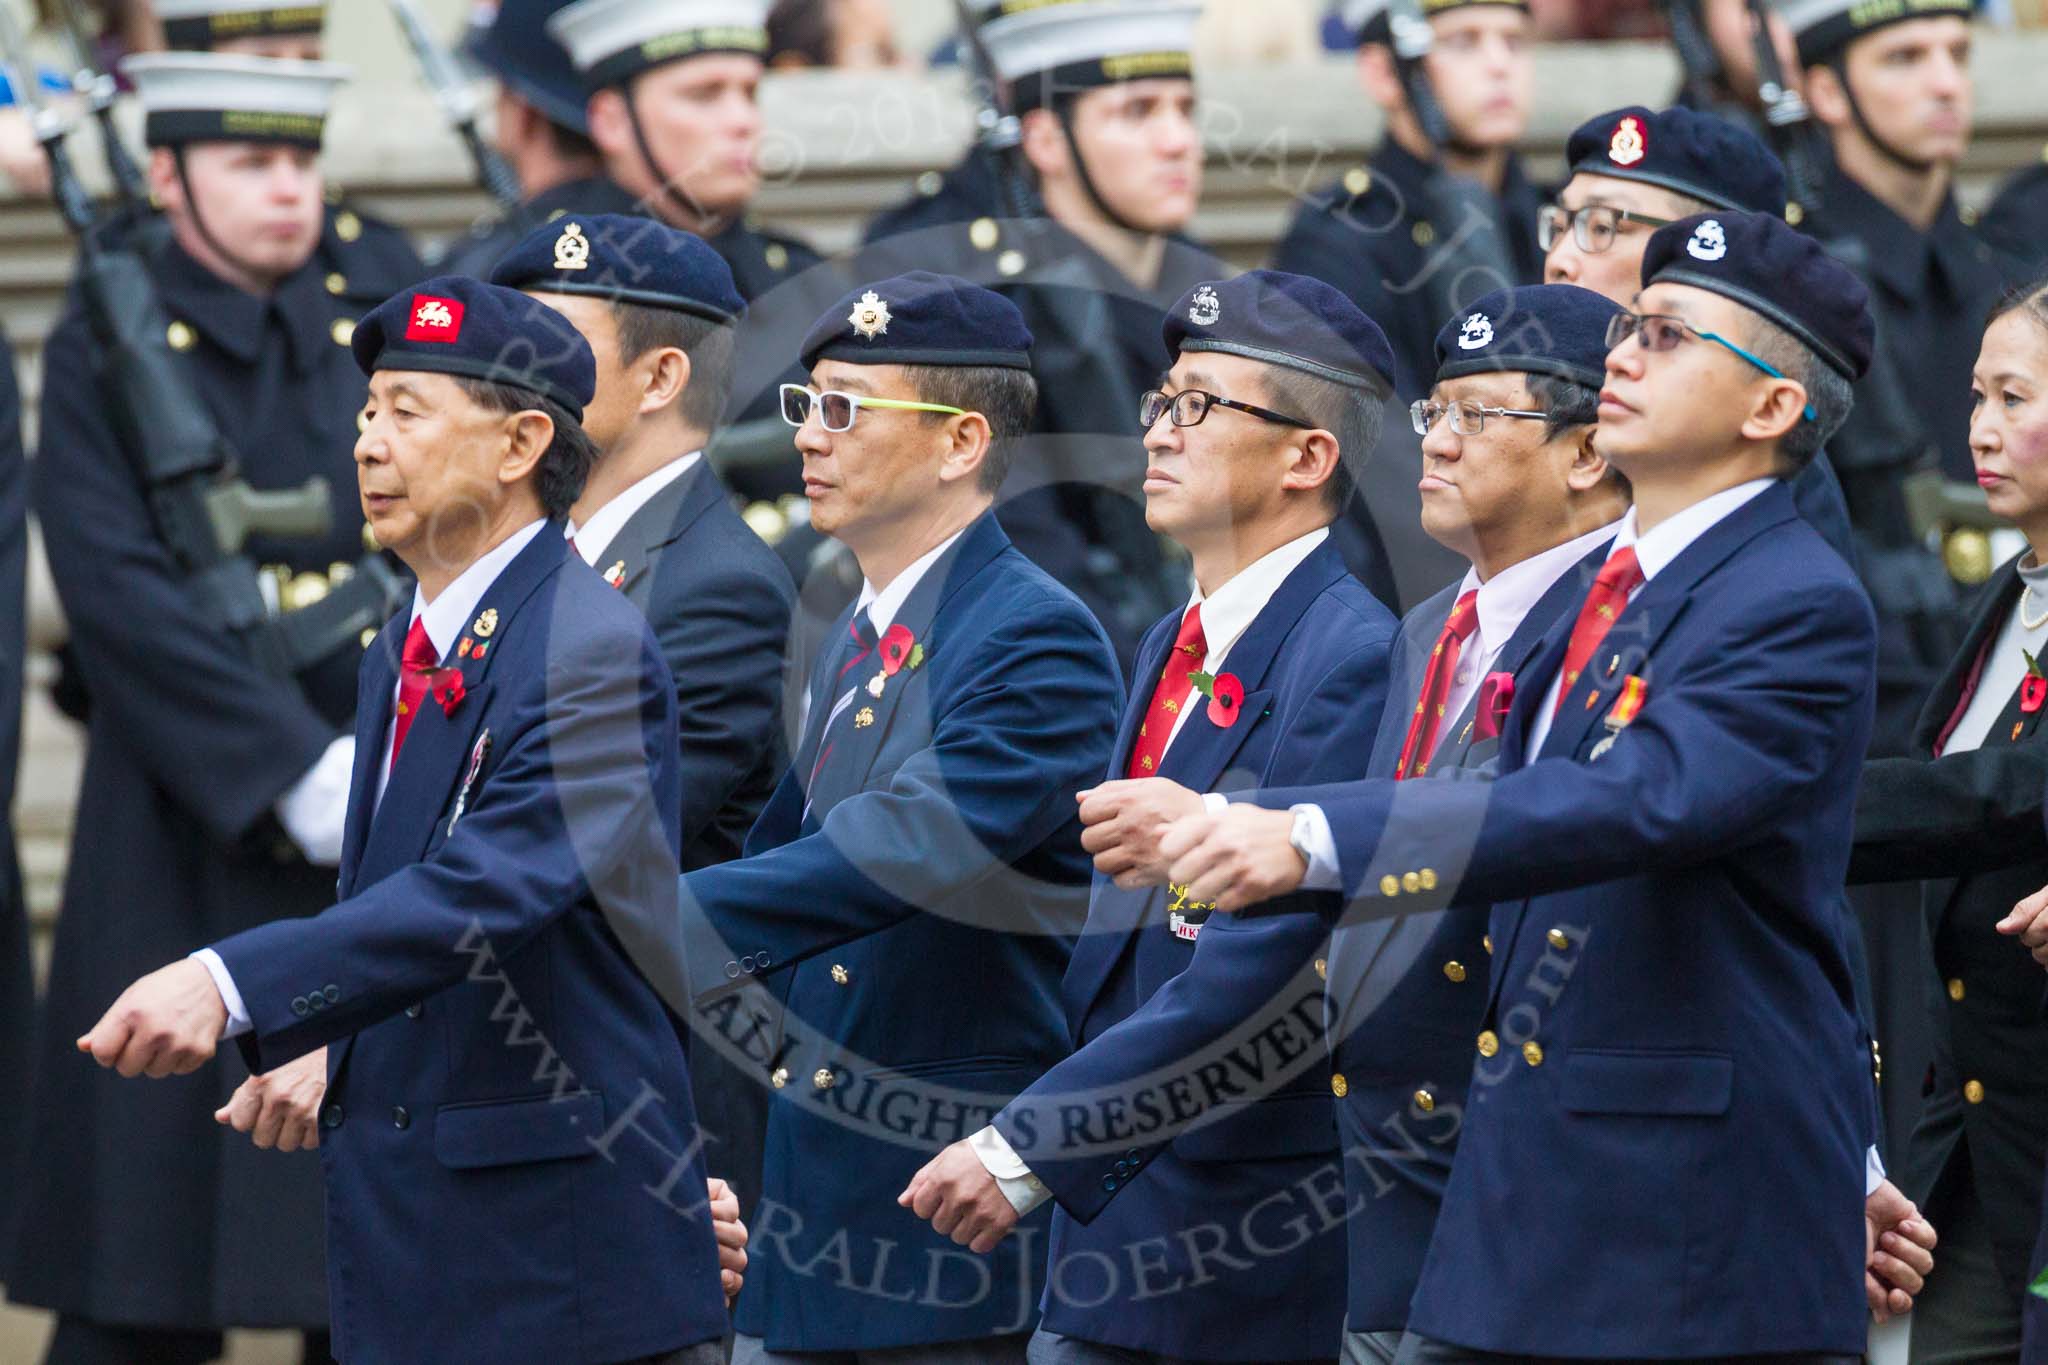 Remembrance Sunday at the Cenotaph 2015: Group D26, Hong Kong Military Service Corps.
Cenotaph, Whitehall, London SW1,
London,
Greater London,
United Kingdom,
on 08 November 2015 at 11:55, image #733